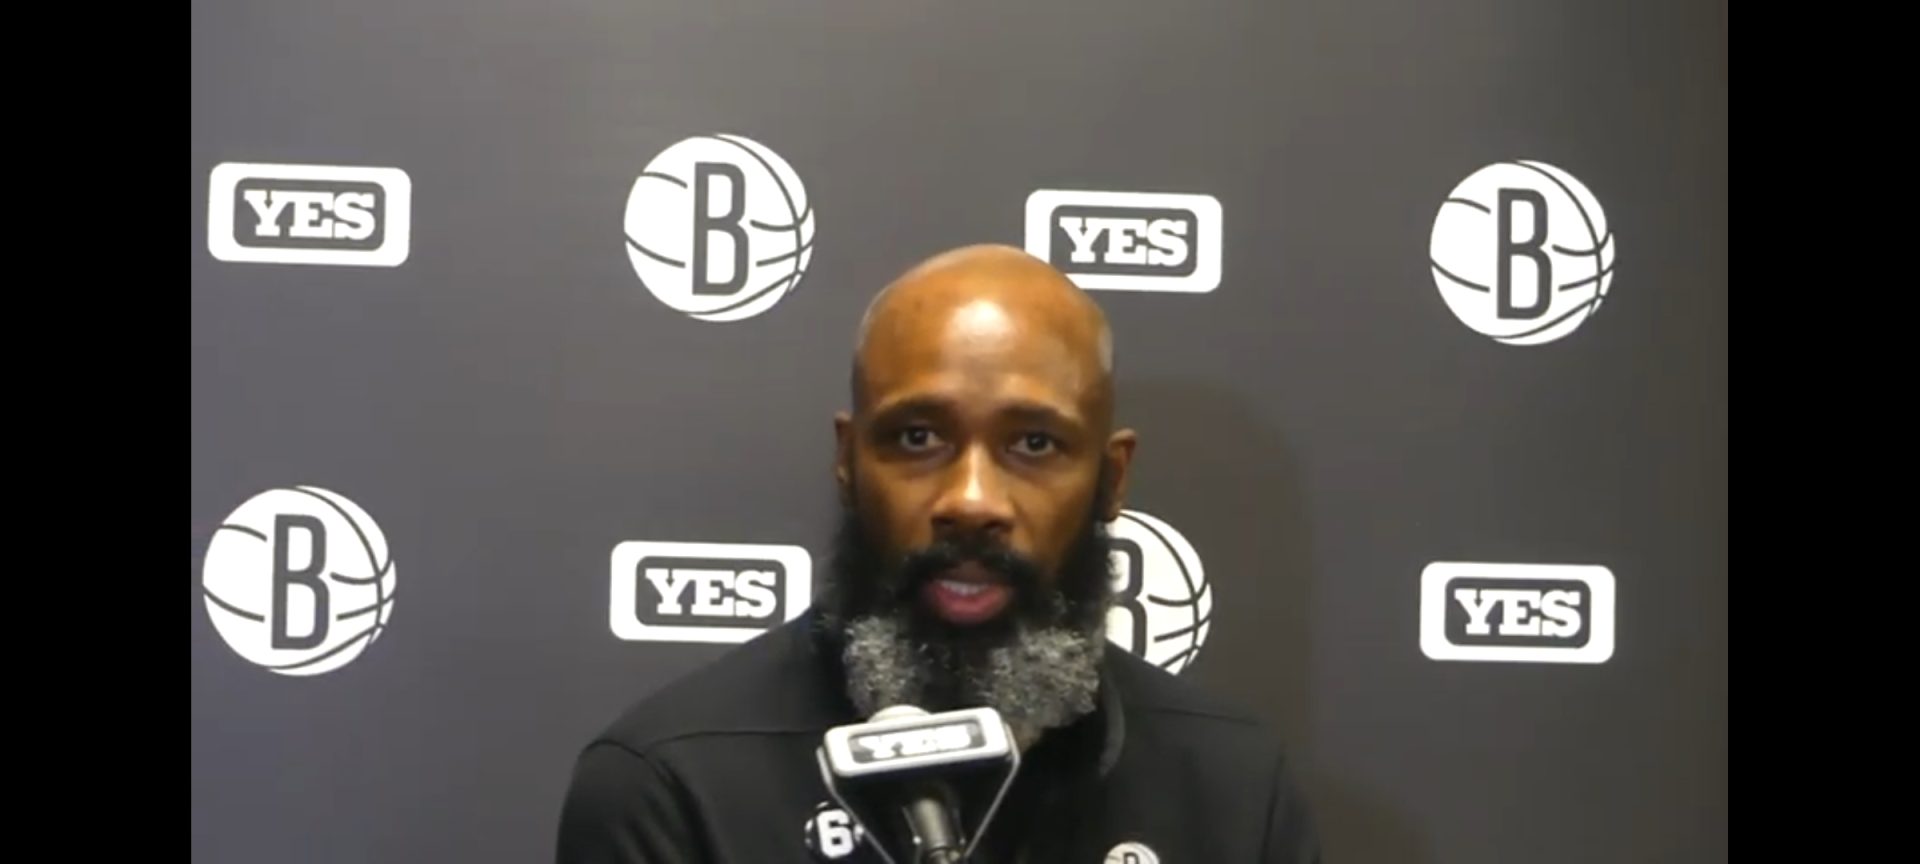 Brooklyn Nets interim head coach Jacque Vaughn speaks to the media (Photo by Derrel Jazz Johnson for rolling out)